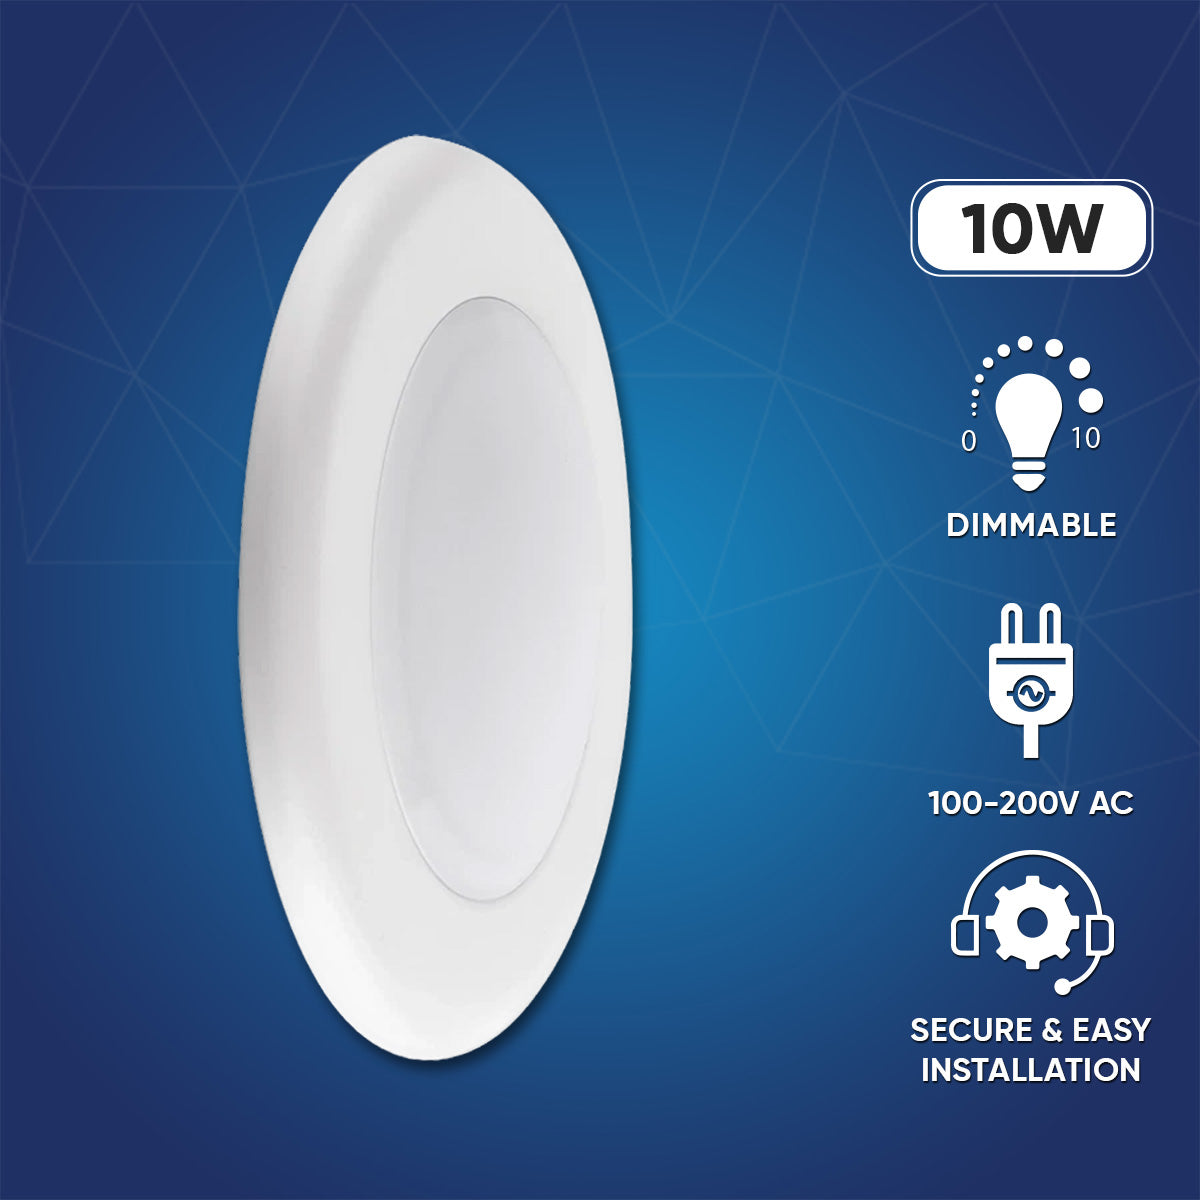 4 Inch Ultra Thin LED Downlights, Surface Mount Disk Light, Round, 10W, Triac Dimming, ETL, Energy Star Listed, For Entrances, Living Rooms, Bedrooms, Kitchens and Dens